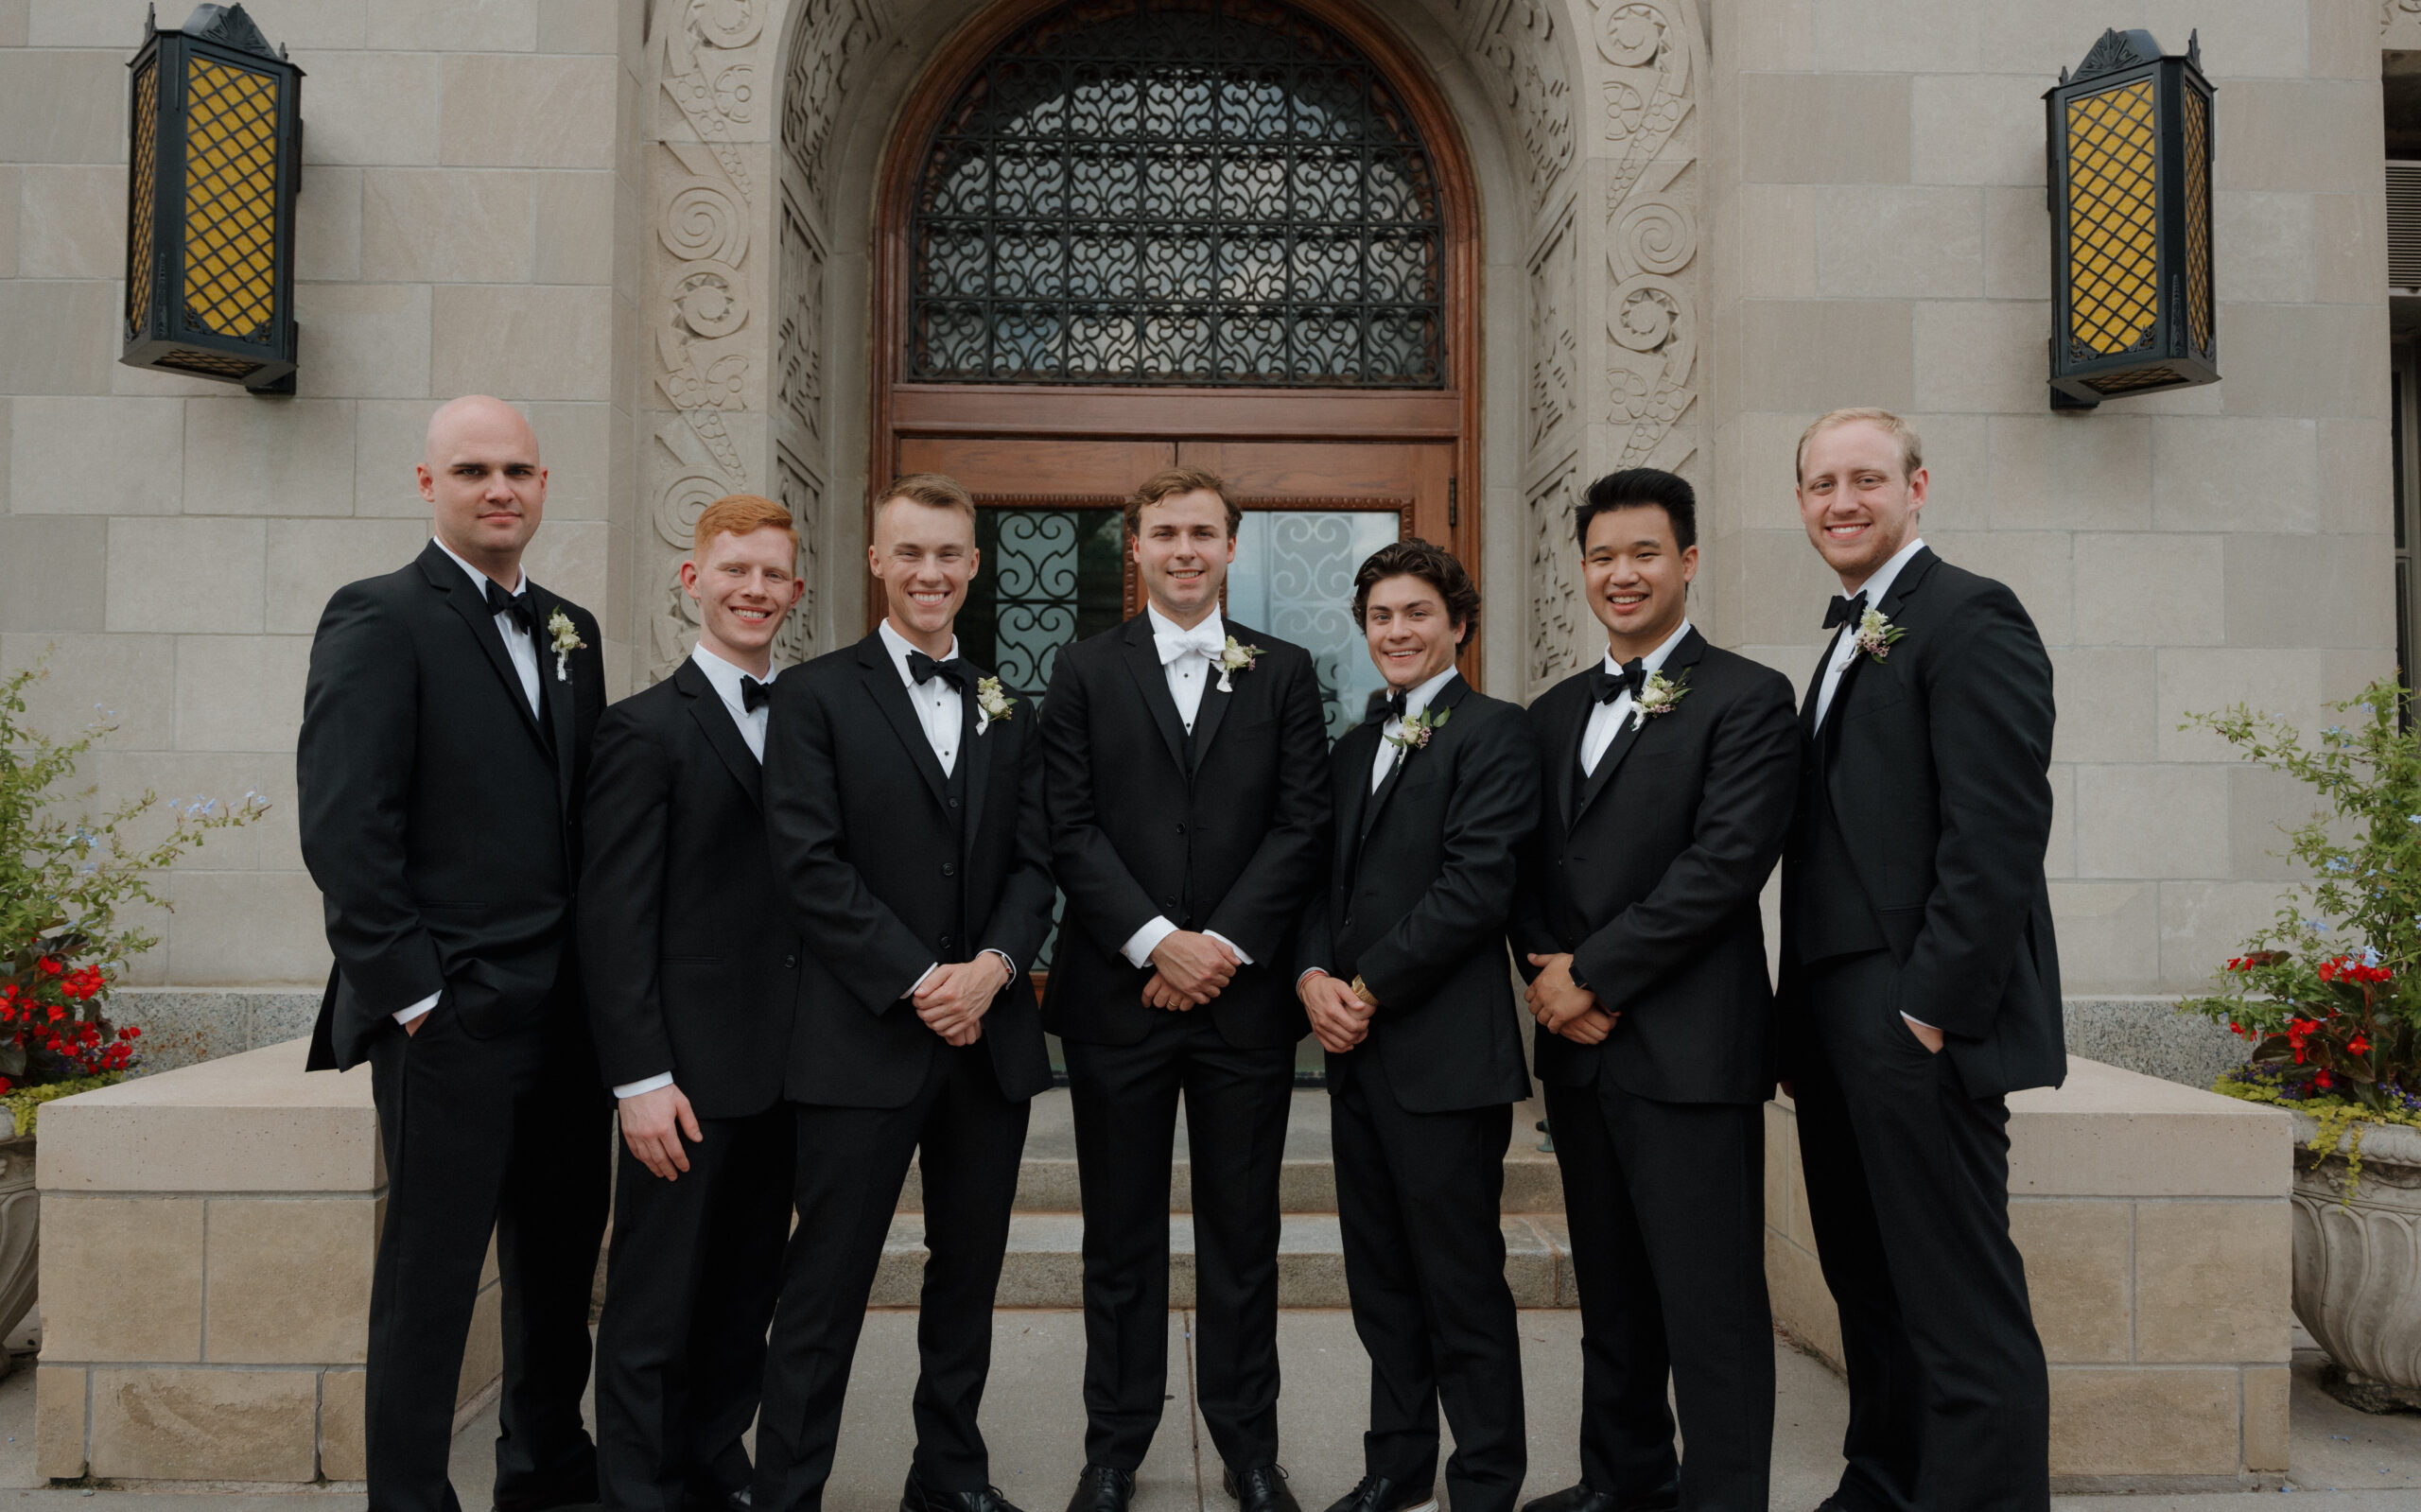 The Groom and his Groomsmen pose in front of Creighton Hall.